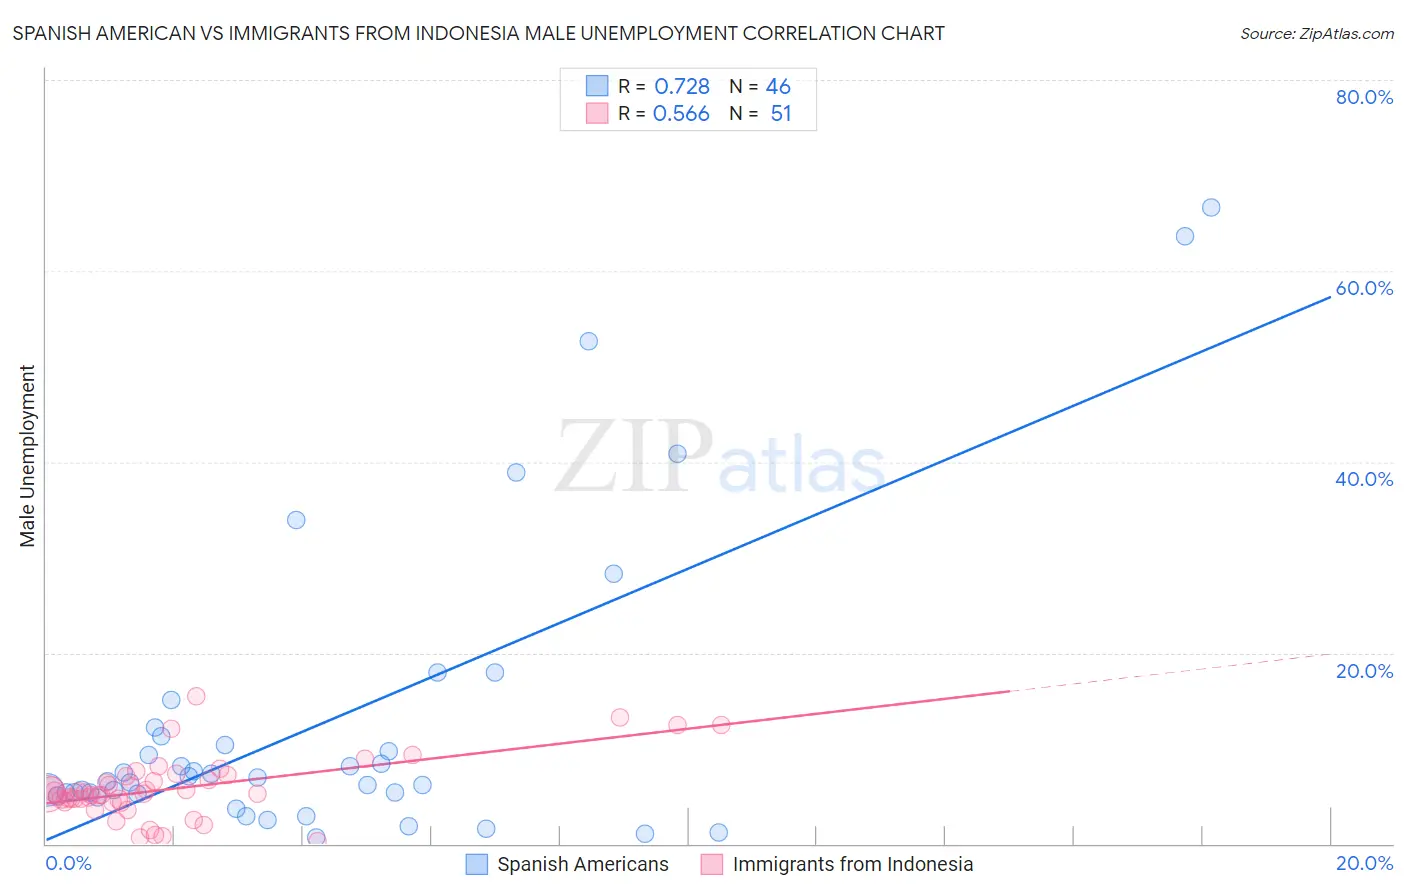 Spanish American vs Immigrants from Indonesia Male Unemployment